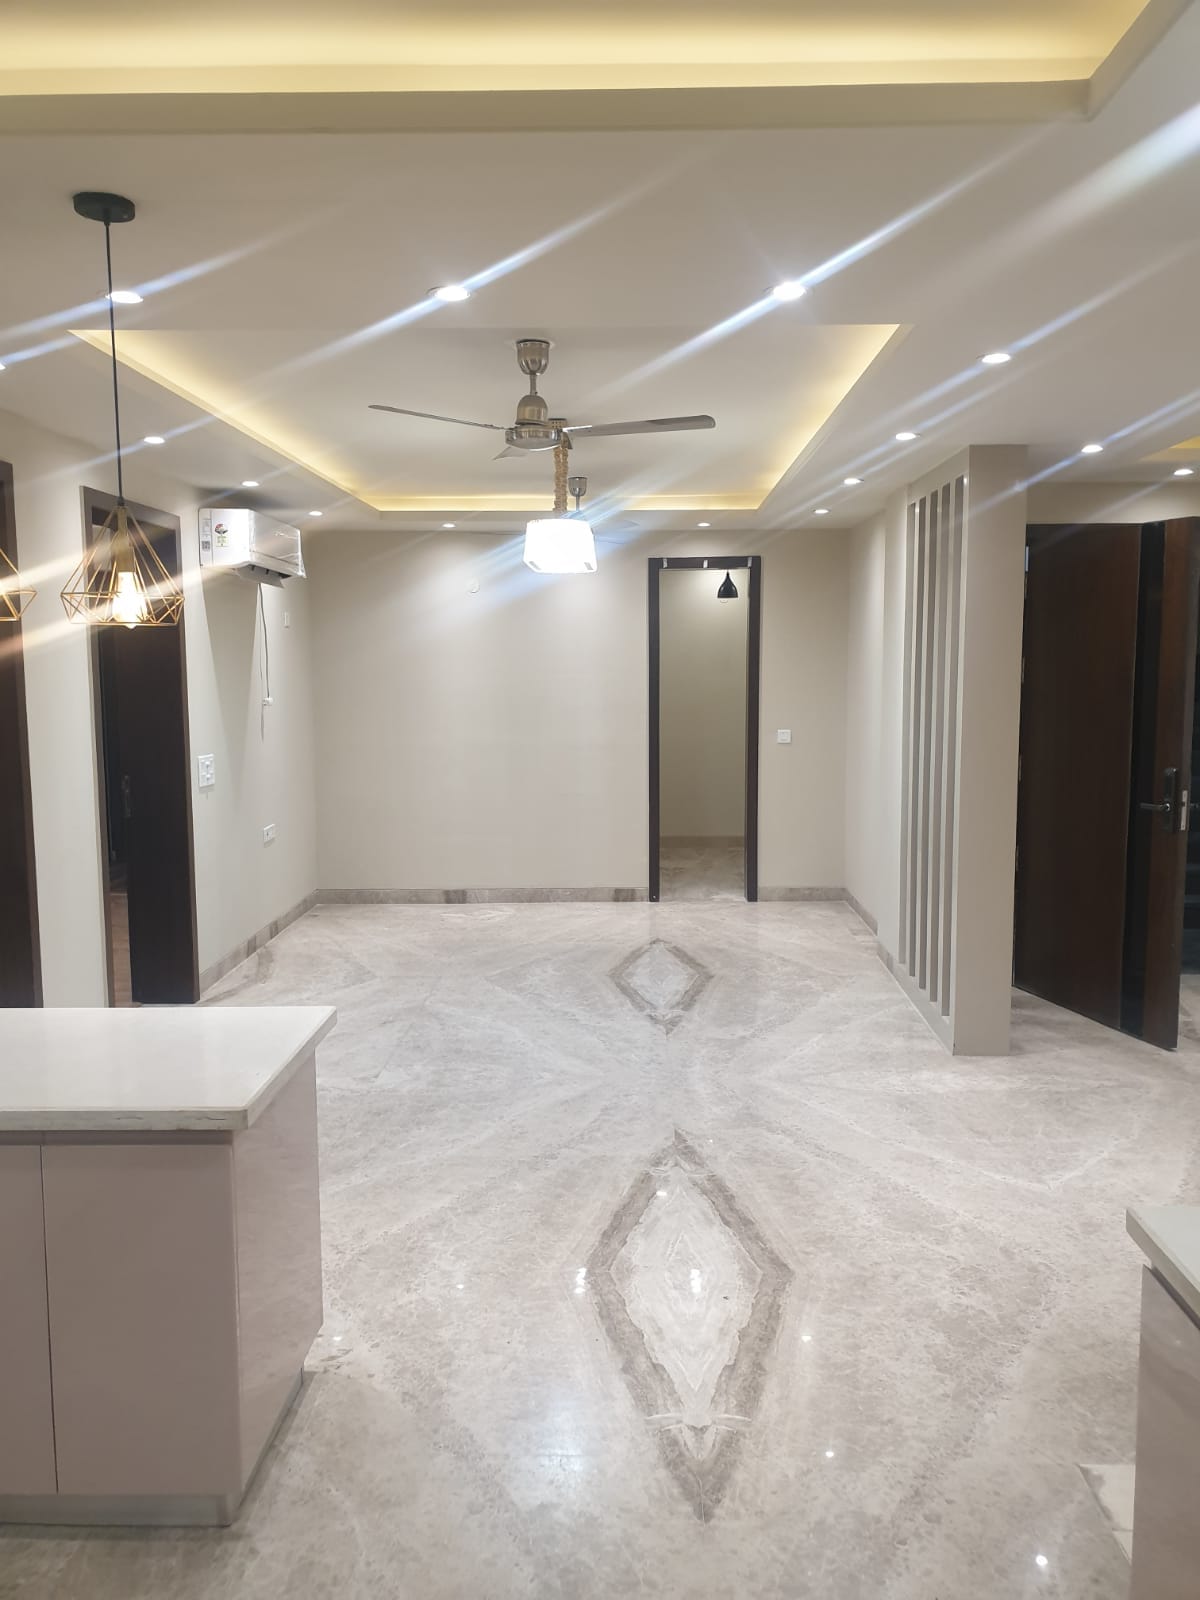 #4 BHK Semi Furnished Available For Sale In #C Block Sushant Lok Phase-1